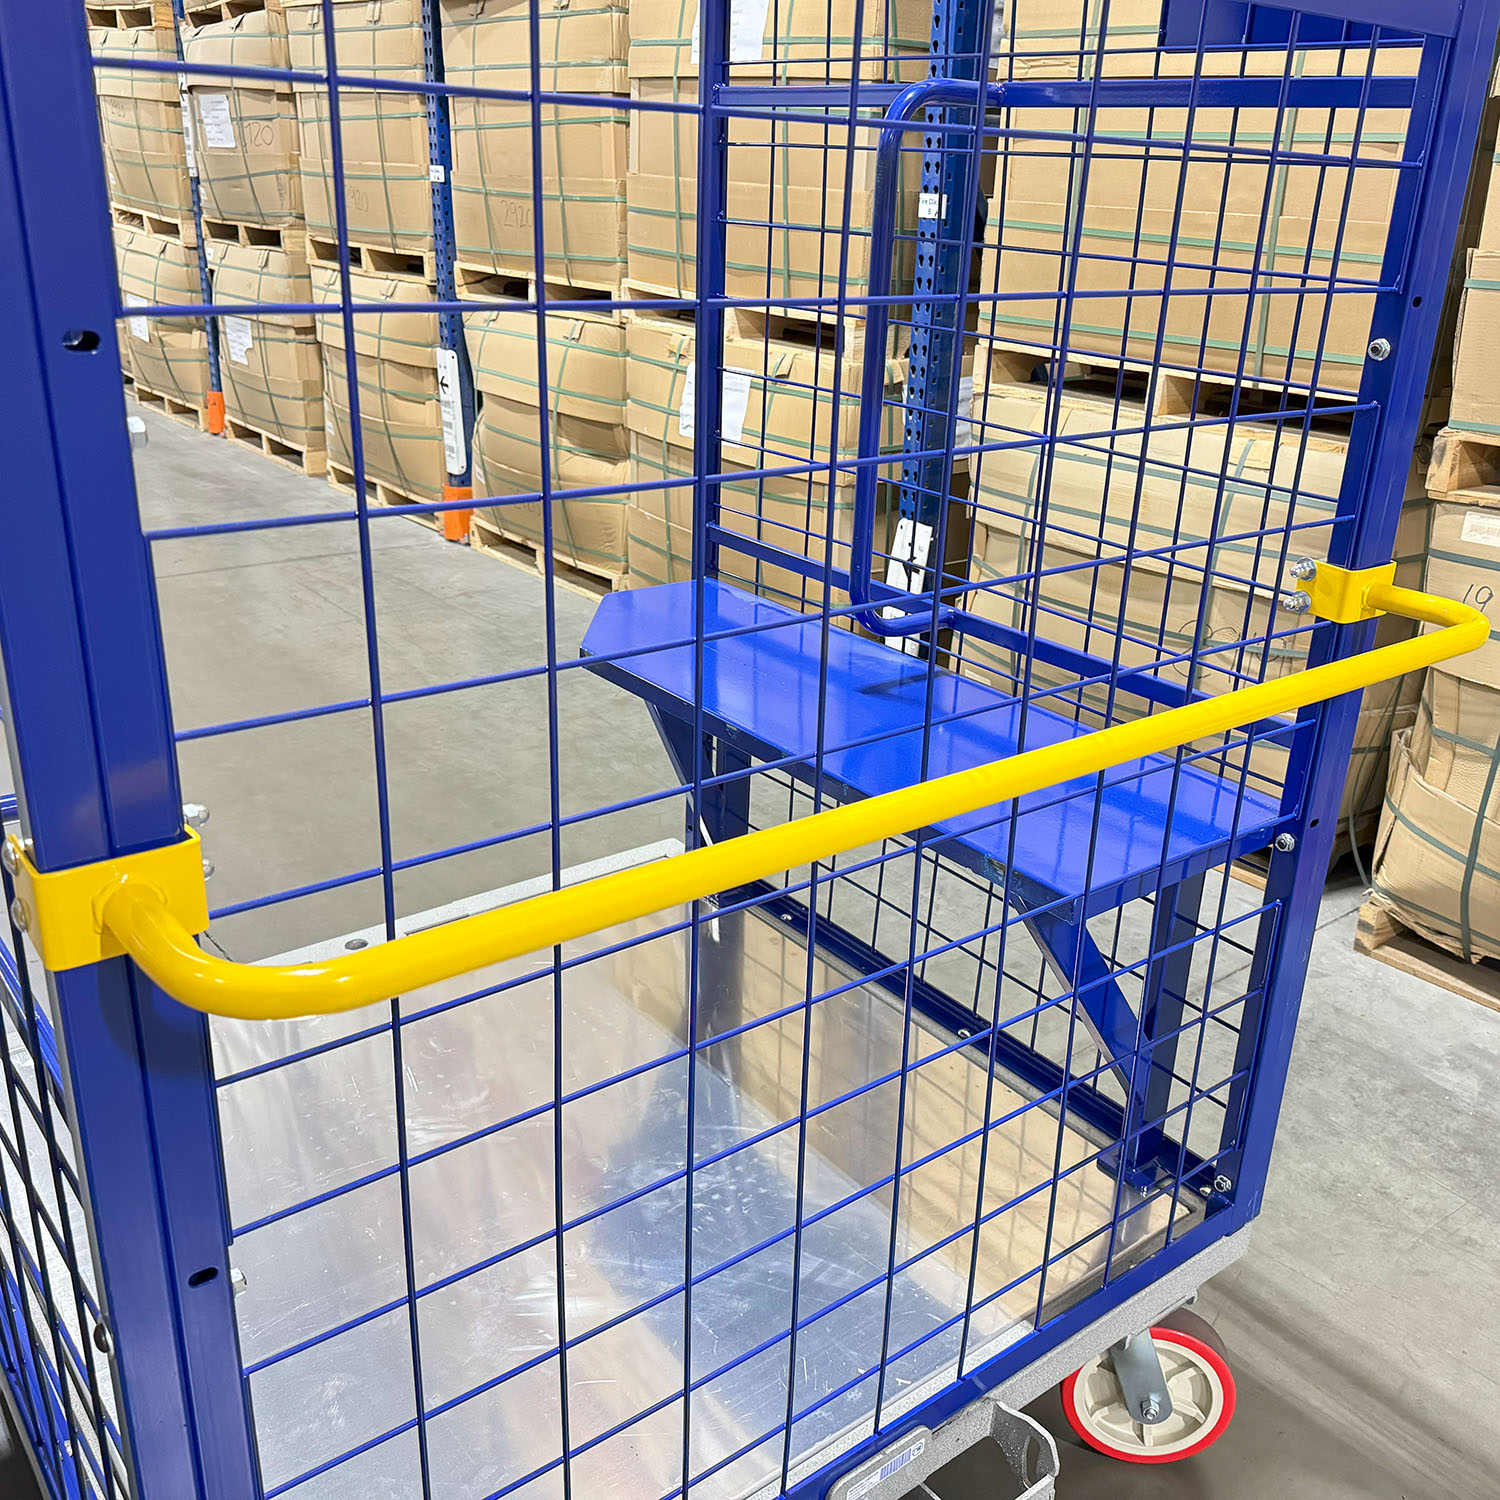 Heavy-duty cage cart Aluminum deck cart Order picking cart Warehouse cage cart Industrial cage cart Storage cage cart Lightweight cage cart Forklift compatible cart Reinforced tow socket cart Wire mesh cage cart Durable cage cart Lightweight and strong cart Easy maneuverability cart High visibility storage cart Secure storage cage cart Safe cage cart Fully assembled cage cart Heavy-duty steel pockets Aluminum deck Swivel casters Foot-activated brakes Forklift cage cart Industrial shelving cart Best cage cart for warehouse storage Lightweight aluminum deck cage cart Durable order picking cage cart High vertical pick cage cart Reinforced tow socket for cage cart Wire mesh sides cage cart